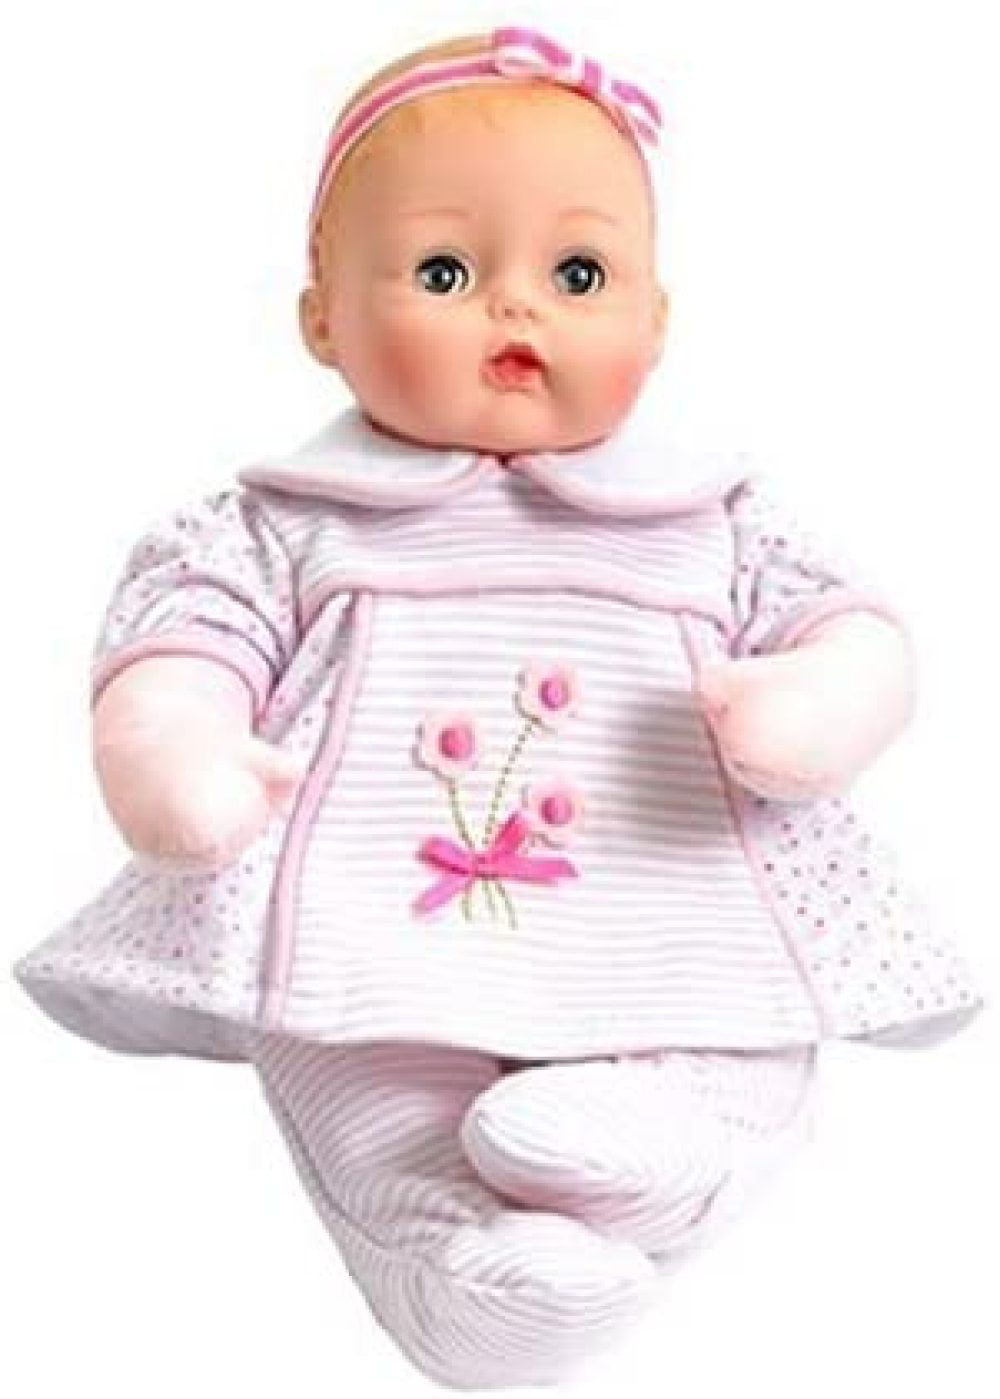 Multicolor Madame Alexander Middleton Doll Newborn Baby Pink Cloud African American